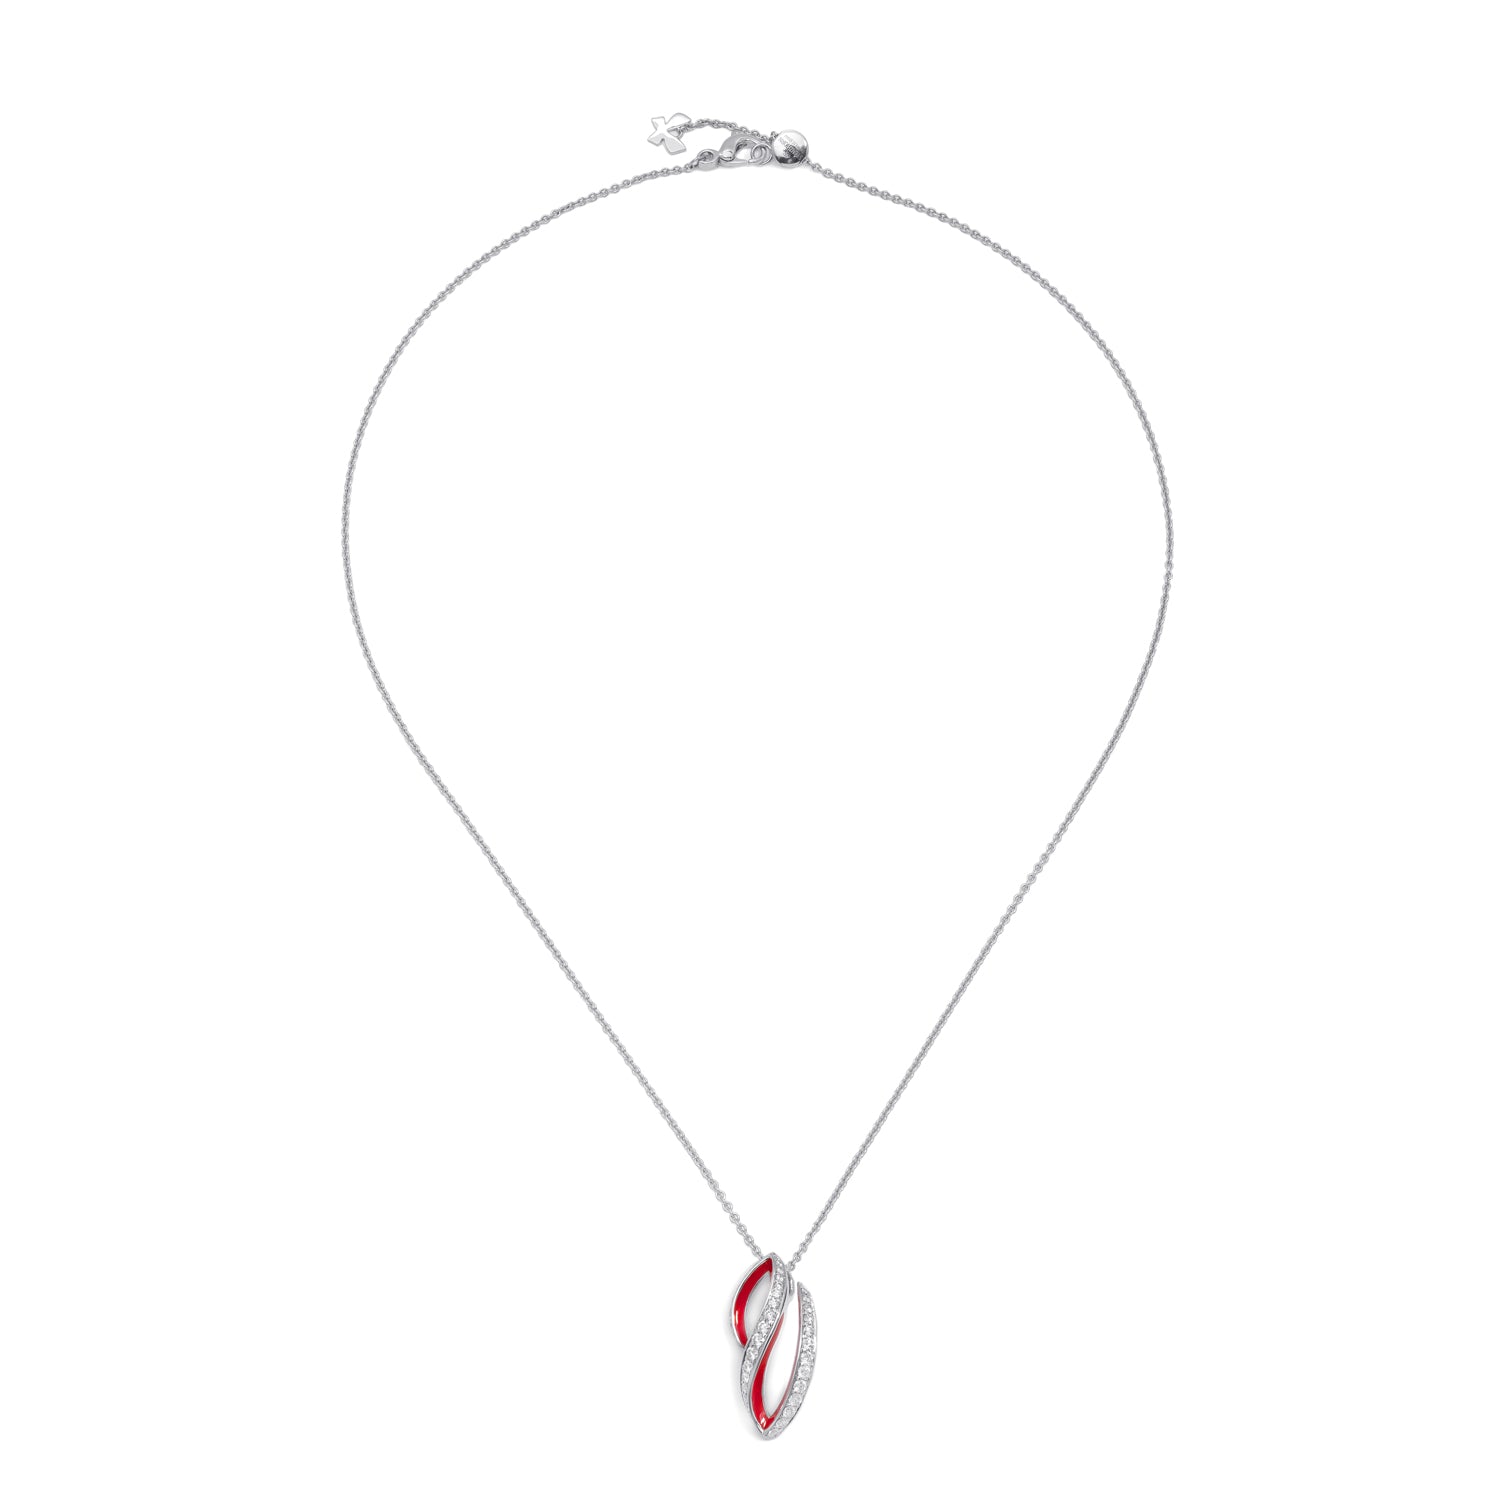 VIVA small Curved Necklace with Diamonds and Red Enamel